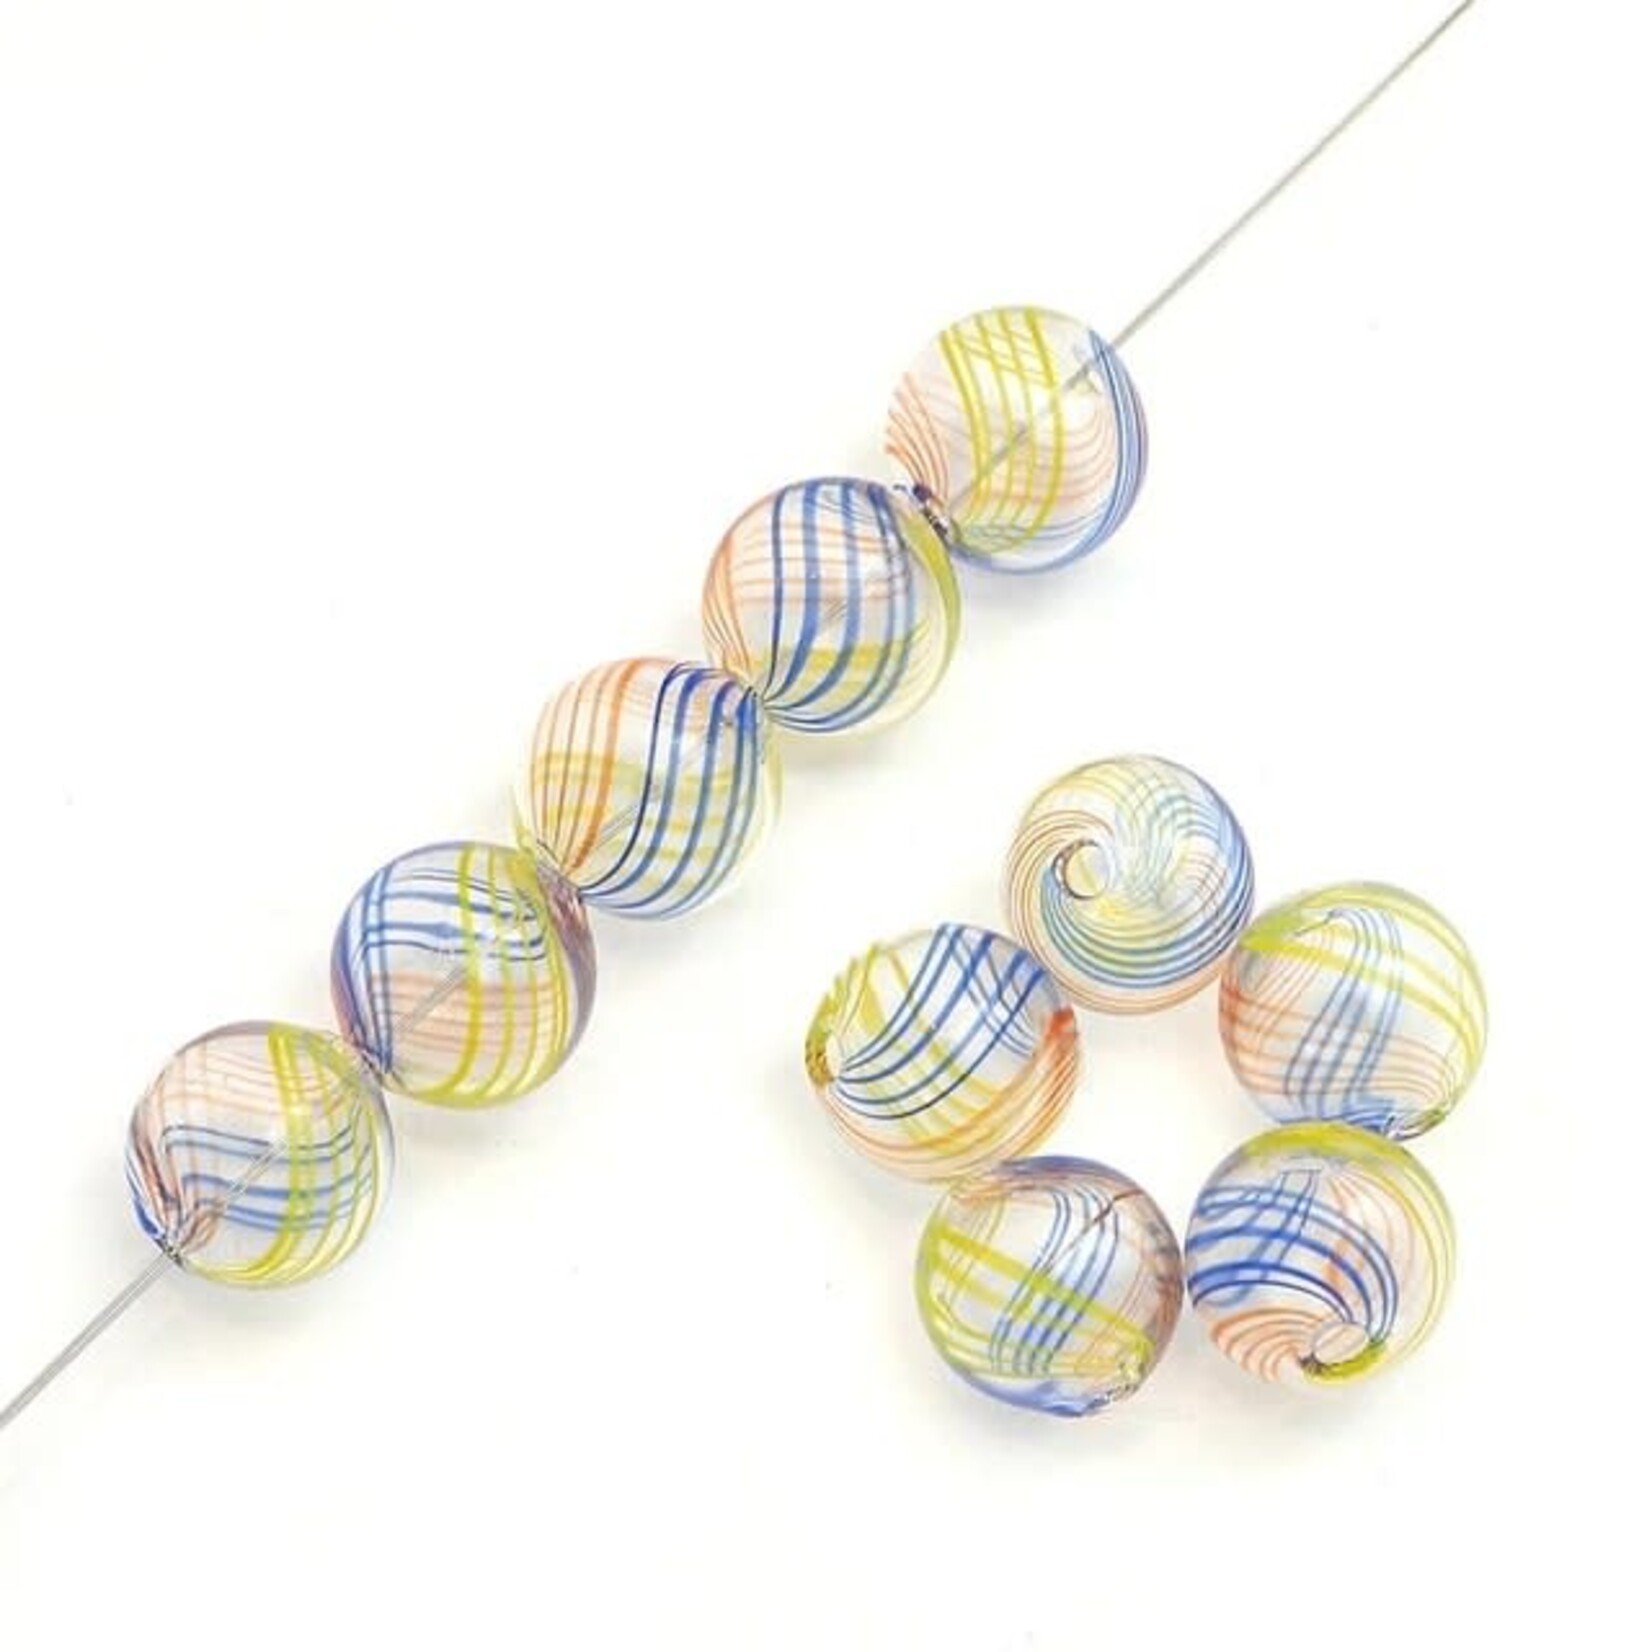 Hollow Lampwork Glass 14mm Clear w/ Multicolored Swirl Round Ball Bead